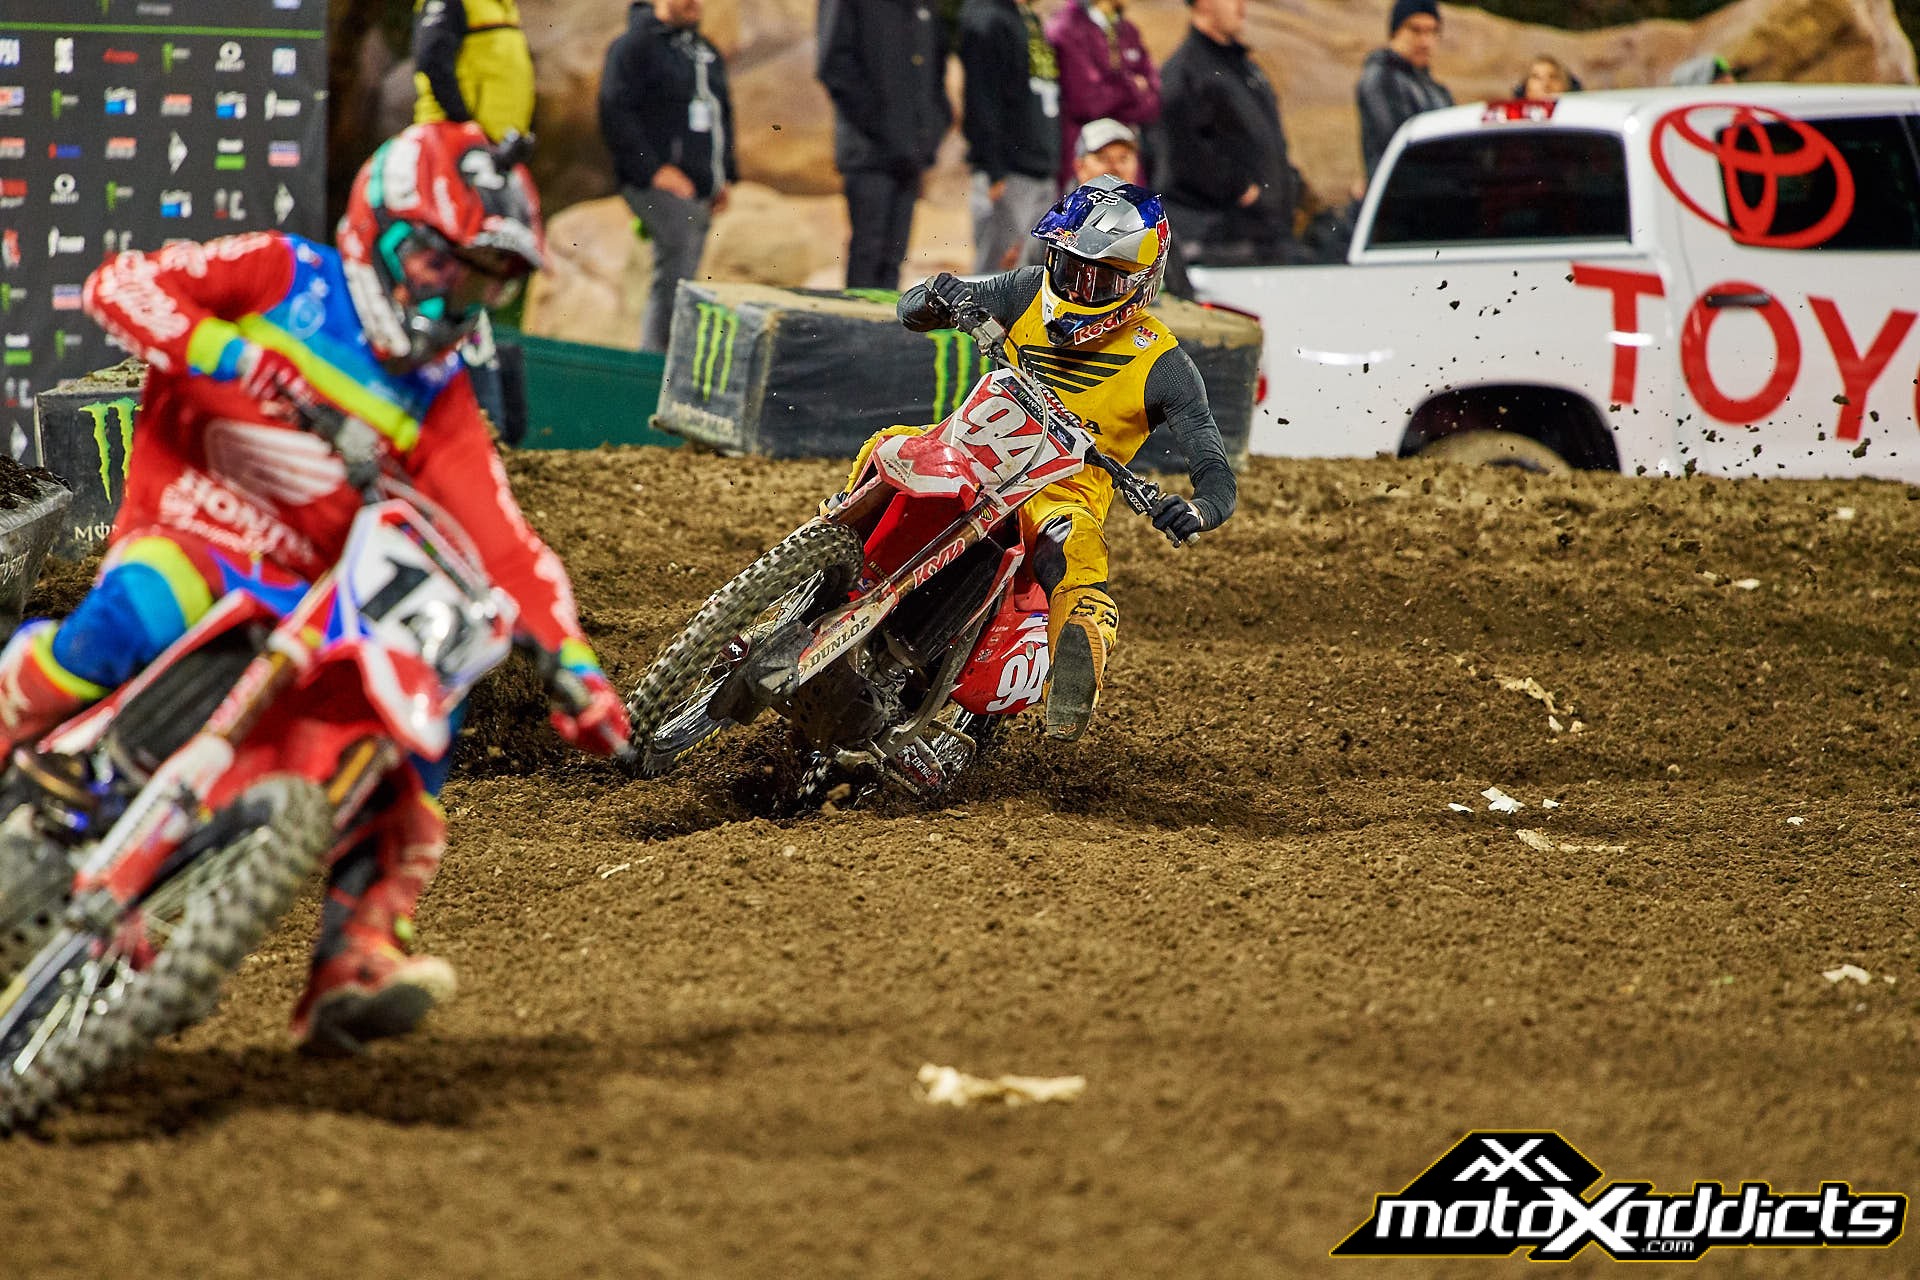 Ken Roczen (94) was shadowing Cole Seely when he crashed out of the series. 